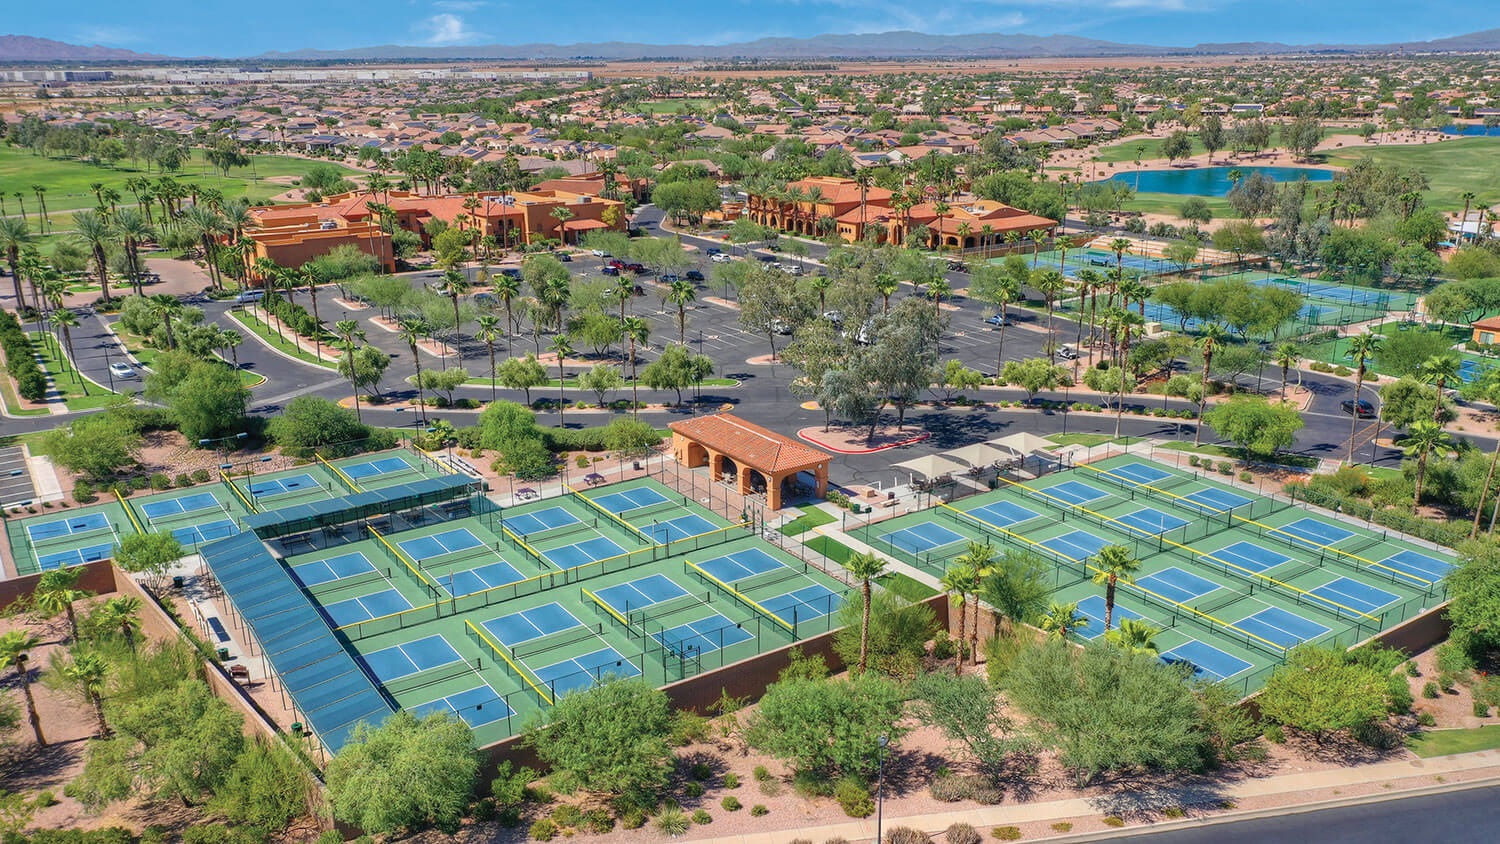 More Pickleball coming to PebbleCreek in Goodyear, Arizona for active 55+ living.